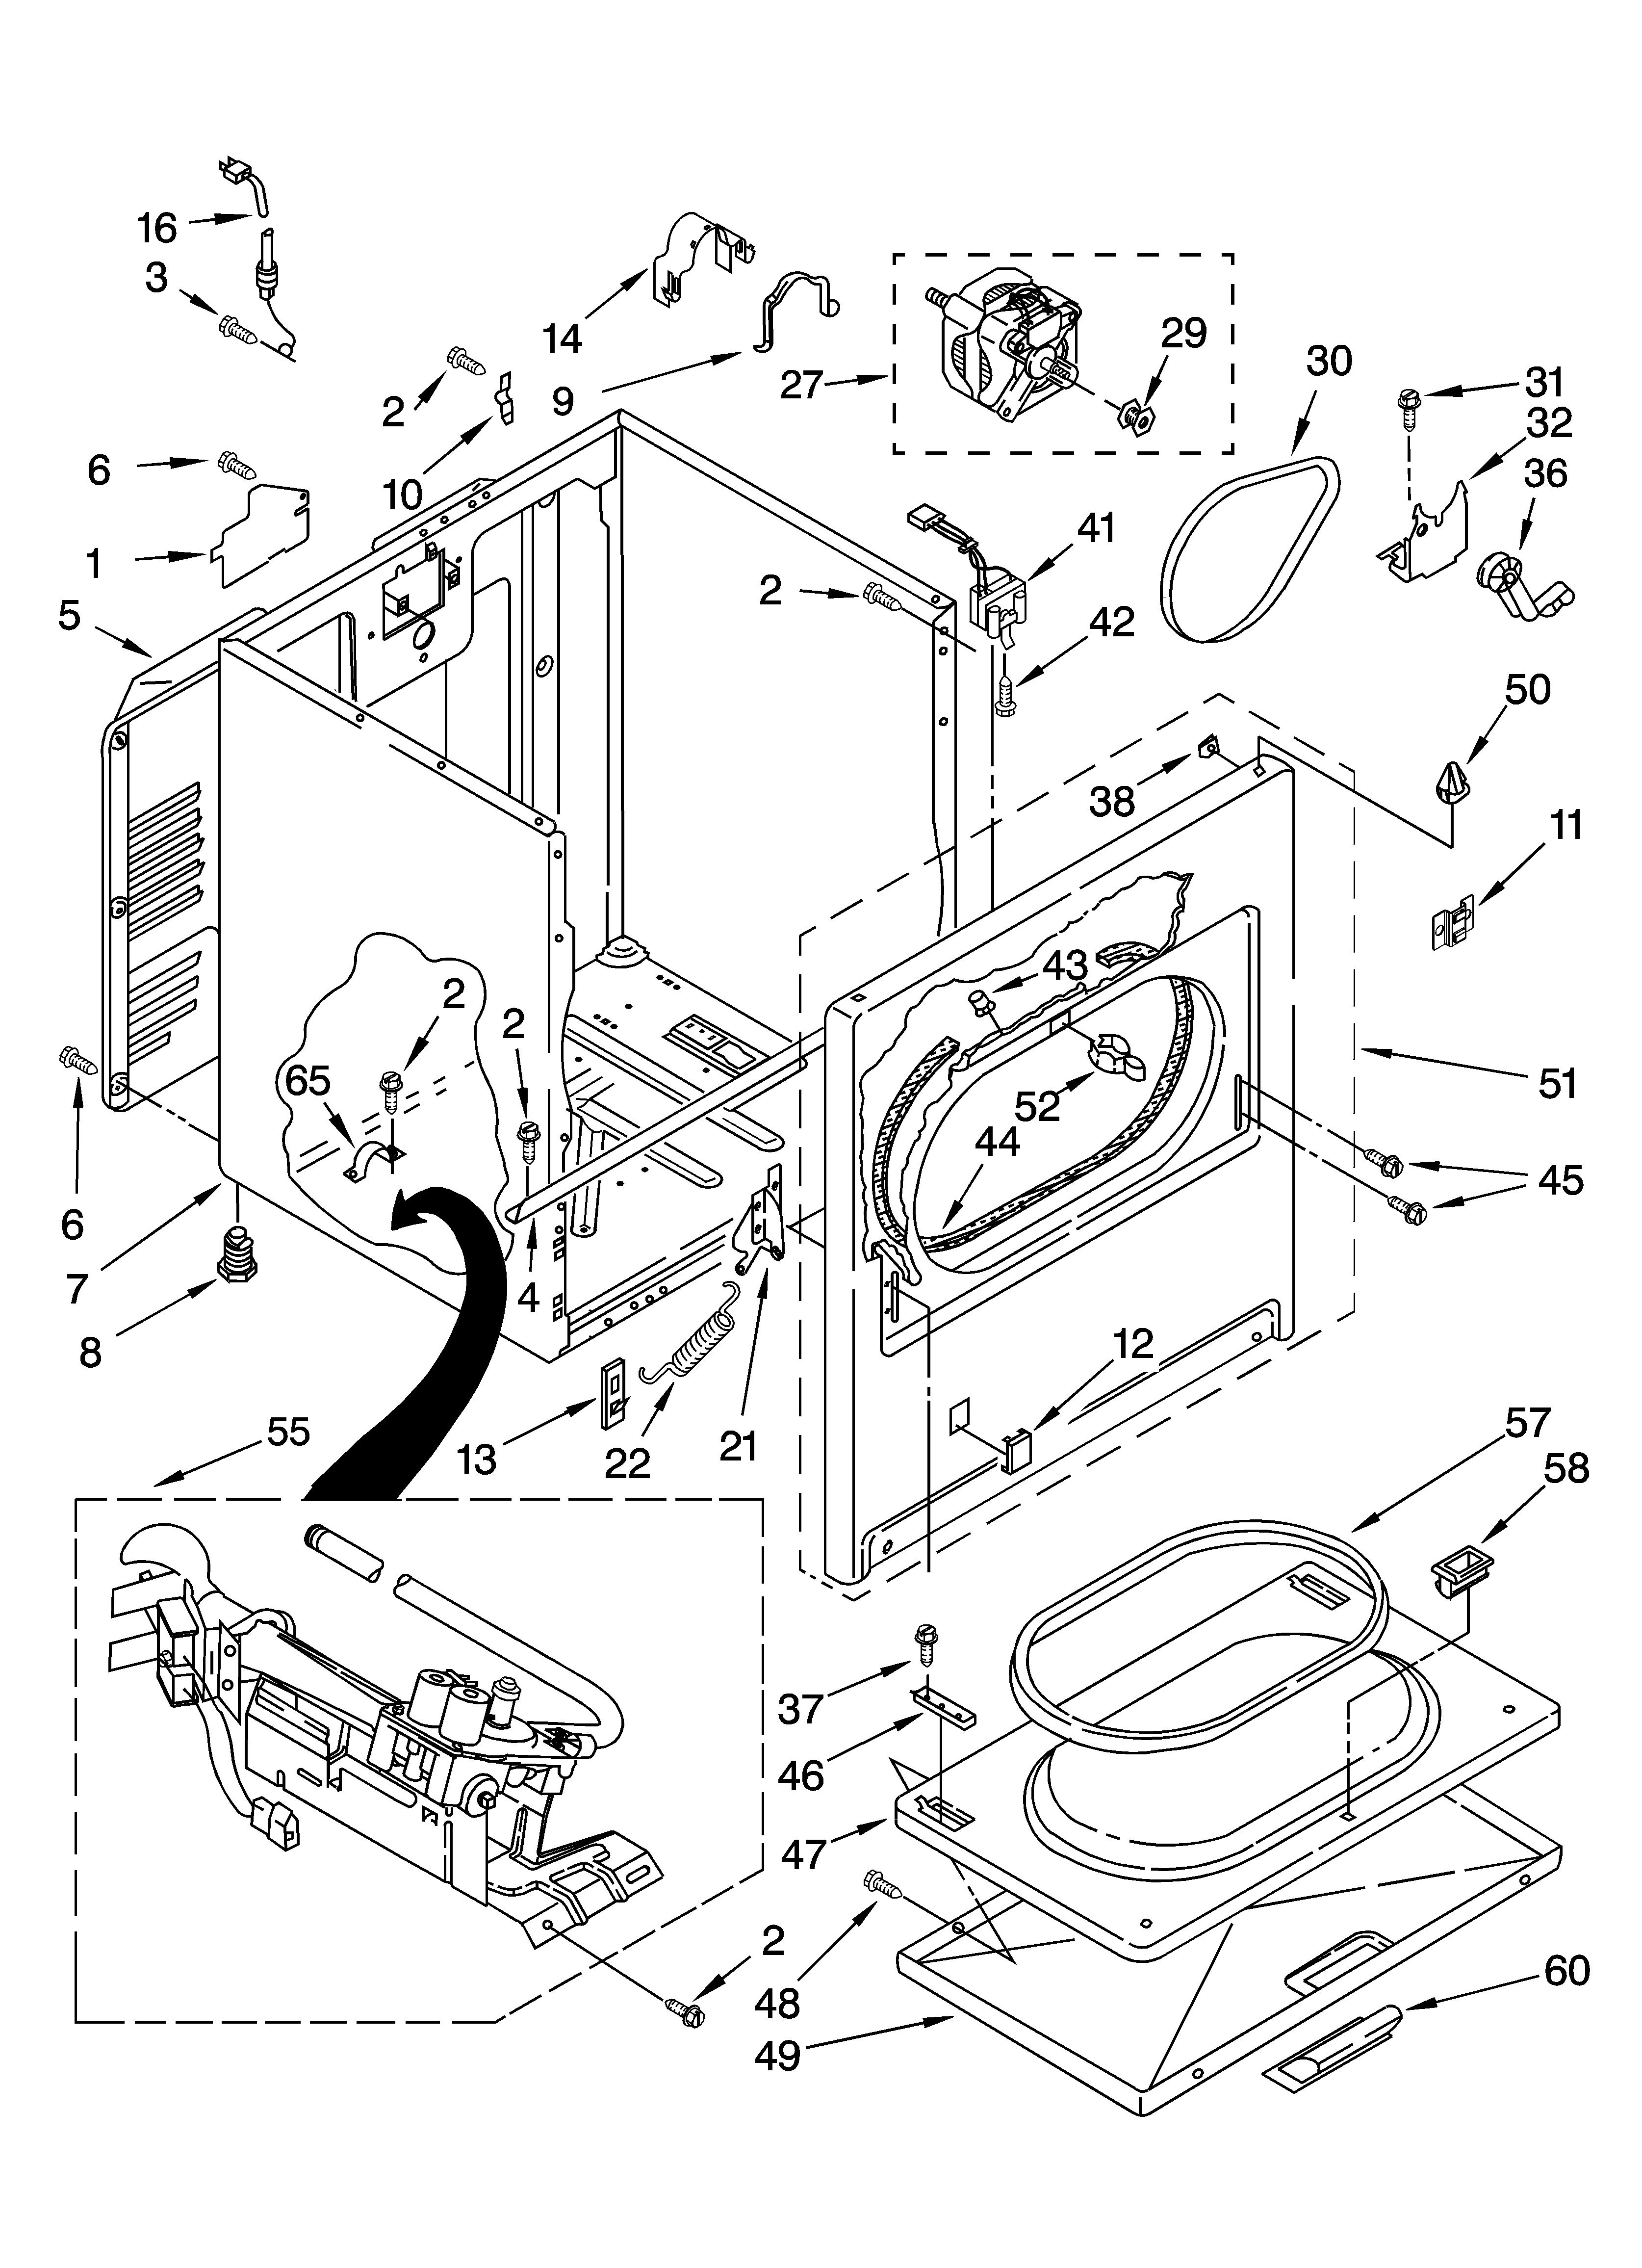 Wiring Diagram For A Kenmore Dryer from c.searspartsdirect.com